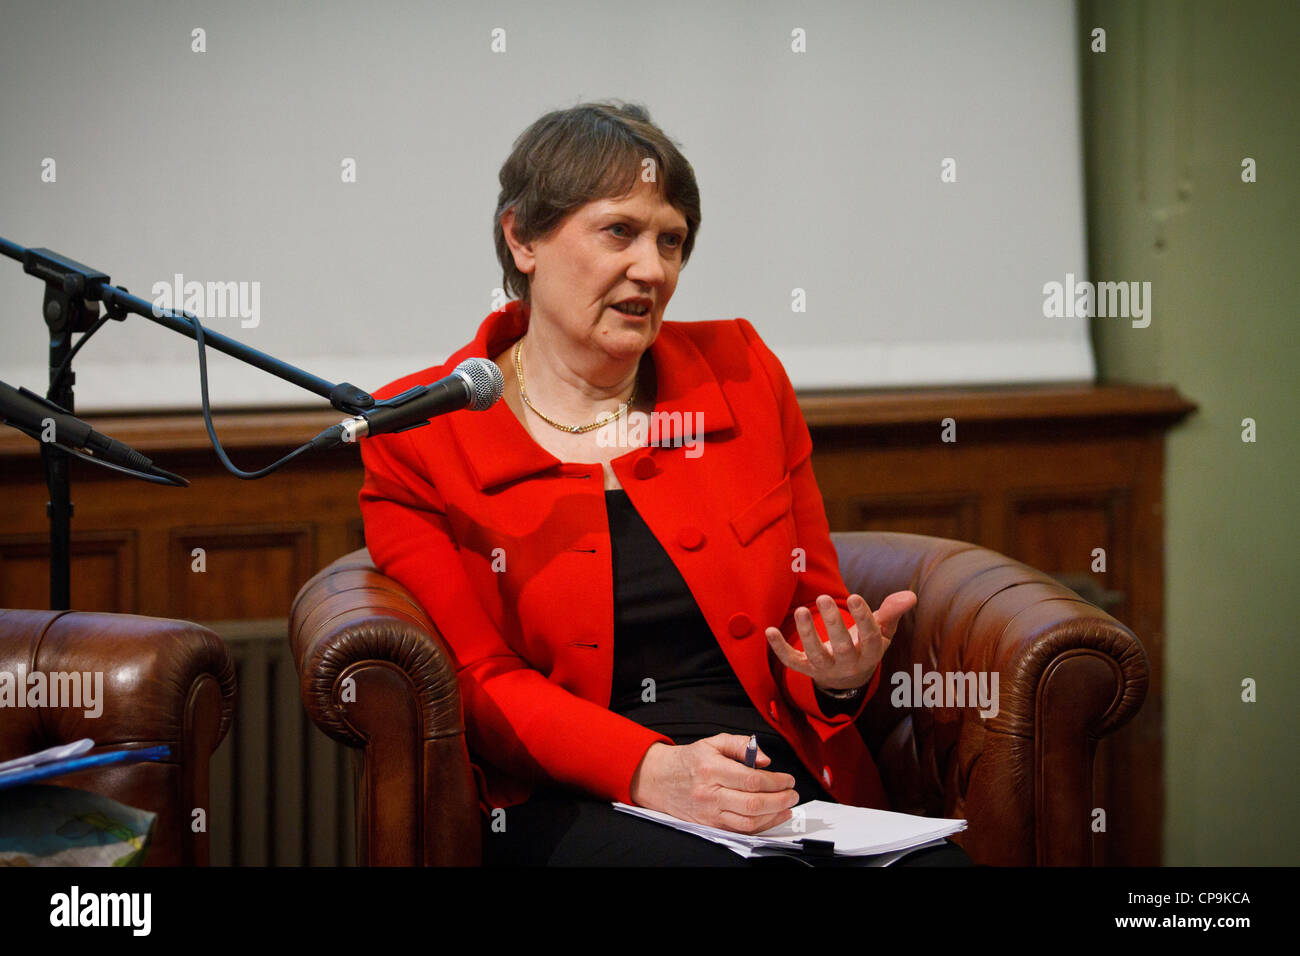 Helen Clark administrator to the UNDP and former New Zealand Prime Minister speaks at Cardiff Bay Stock Photo